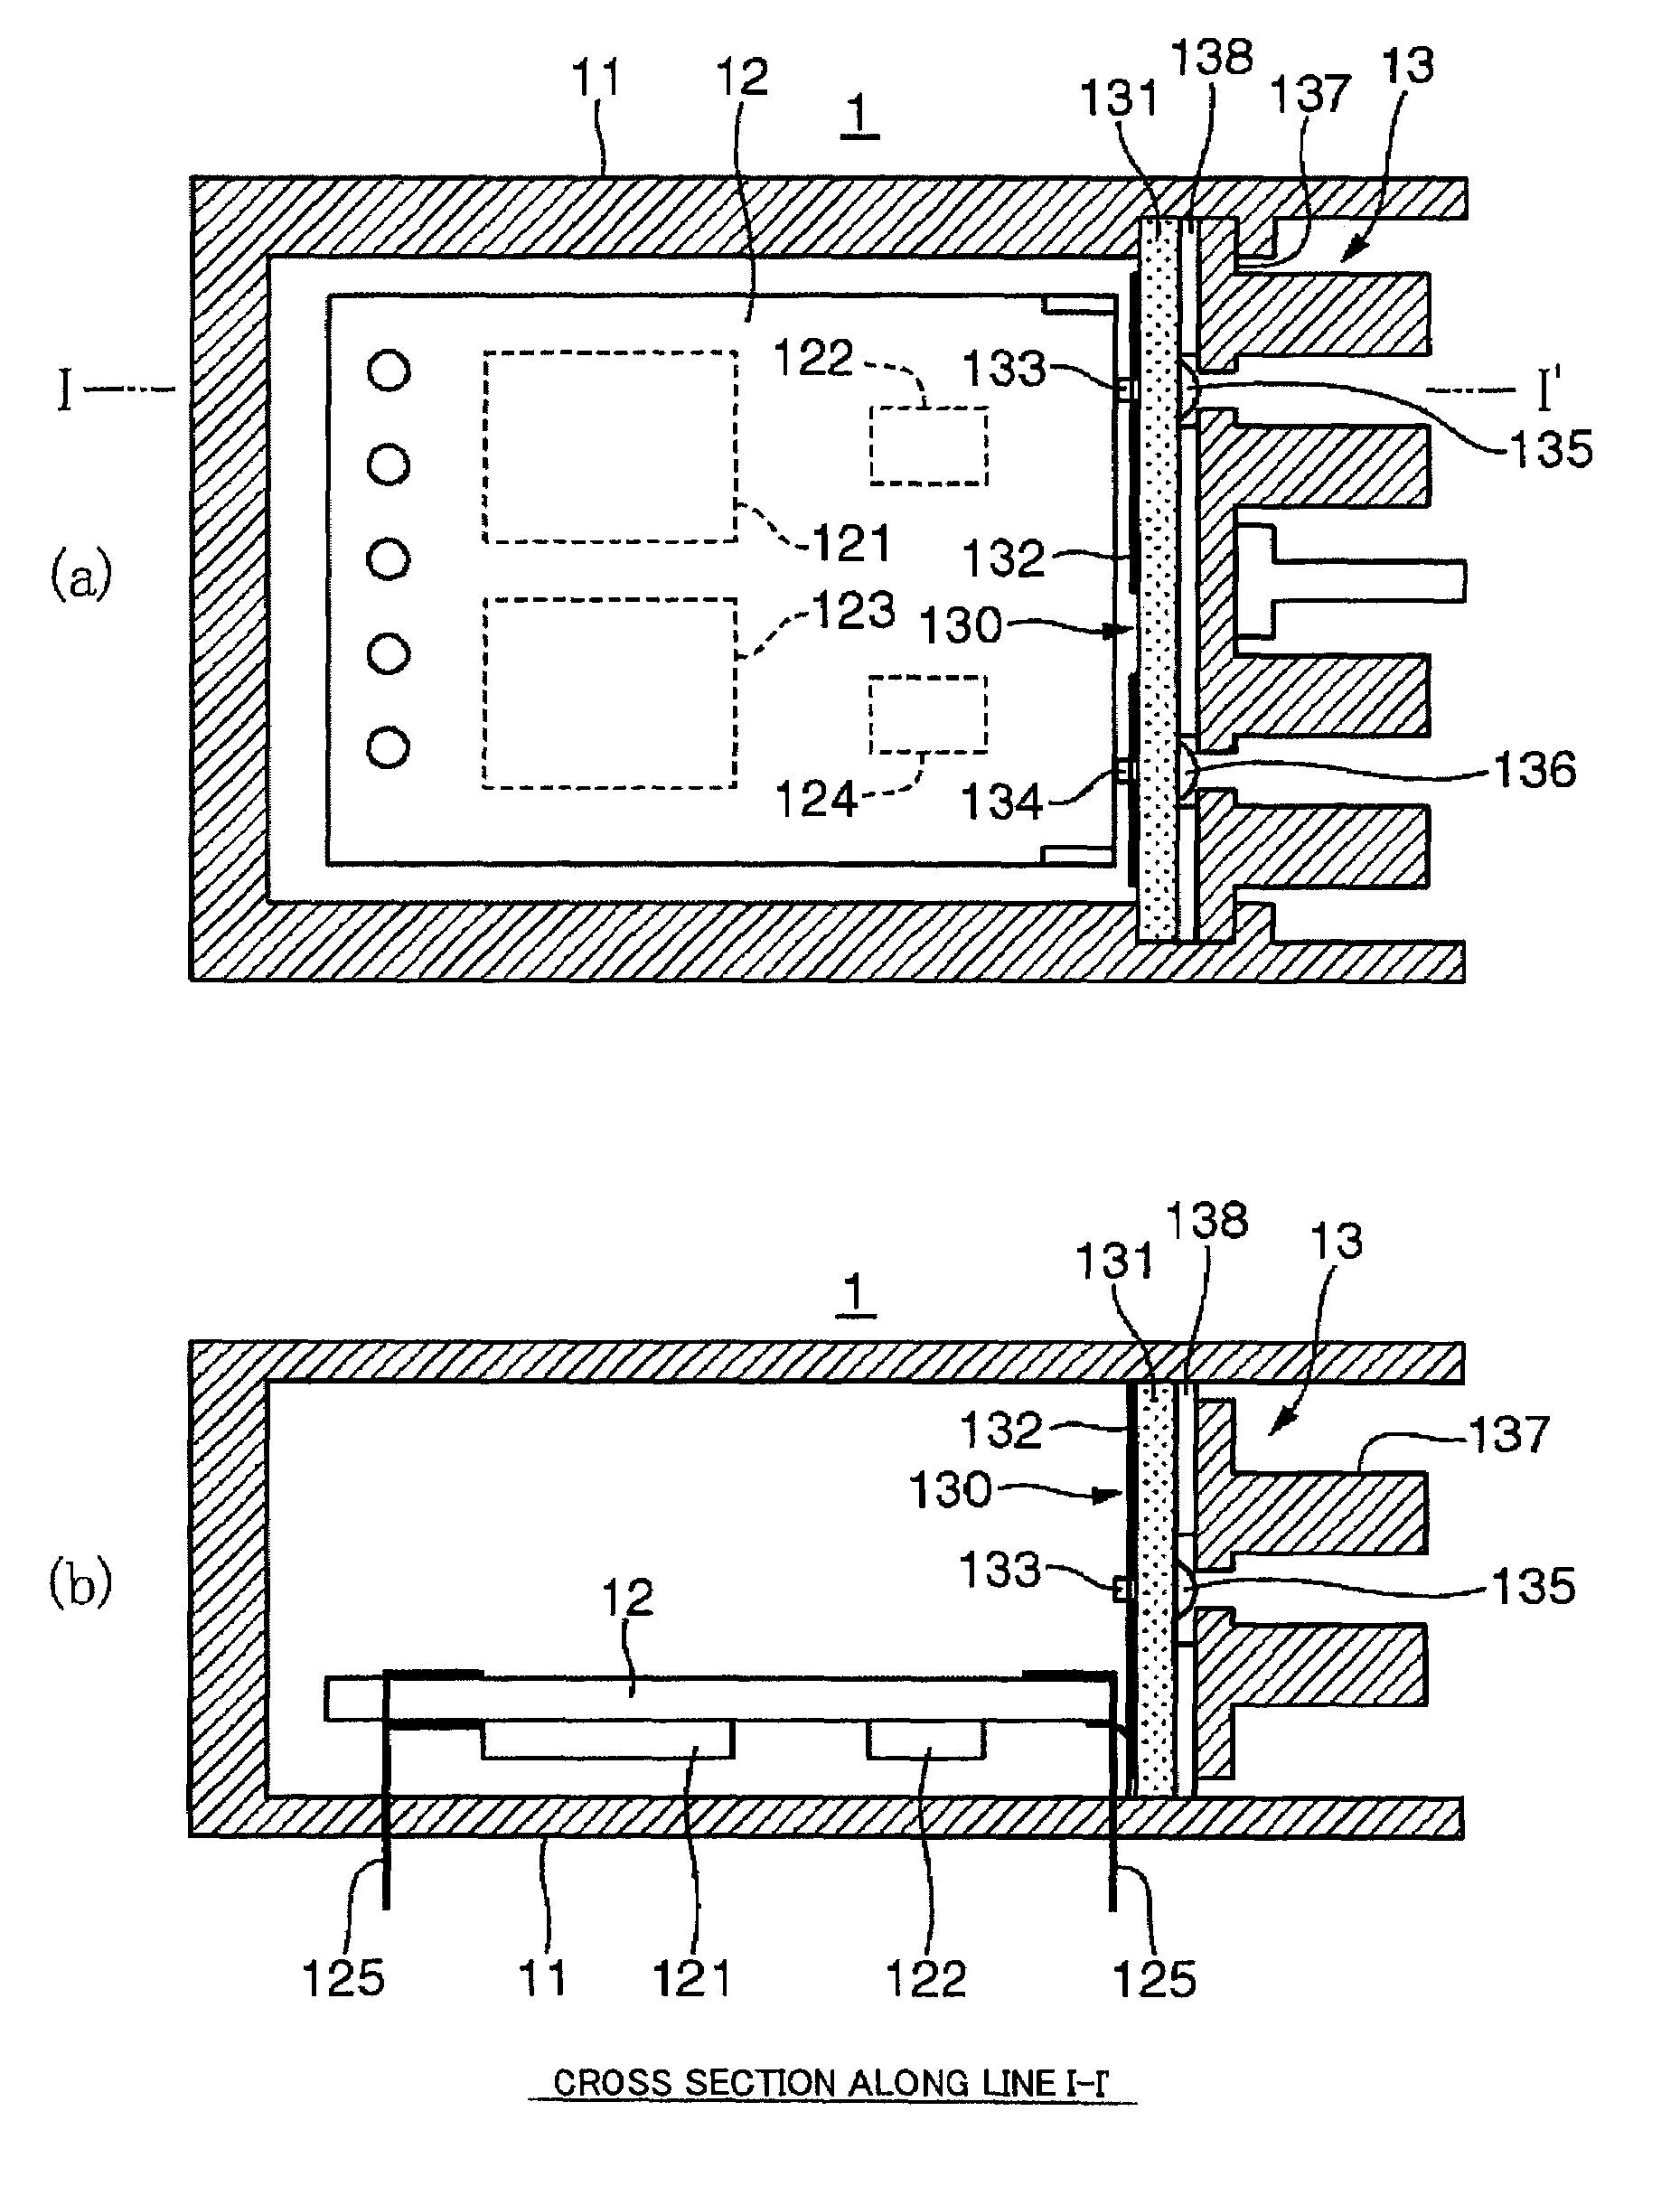 Optical transceiver and method for producing the same